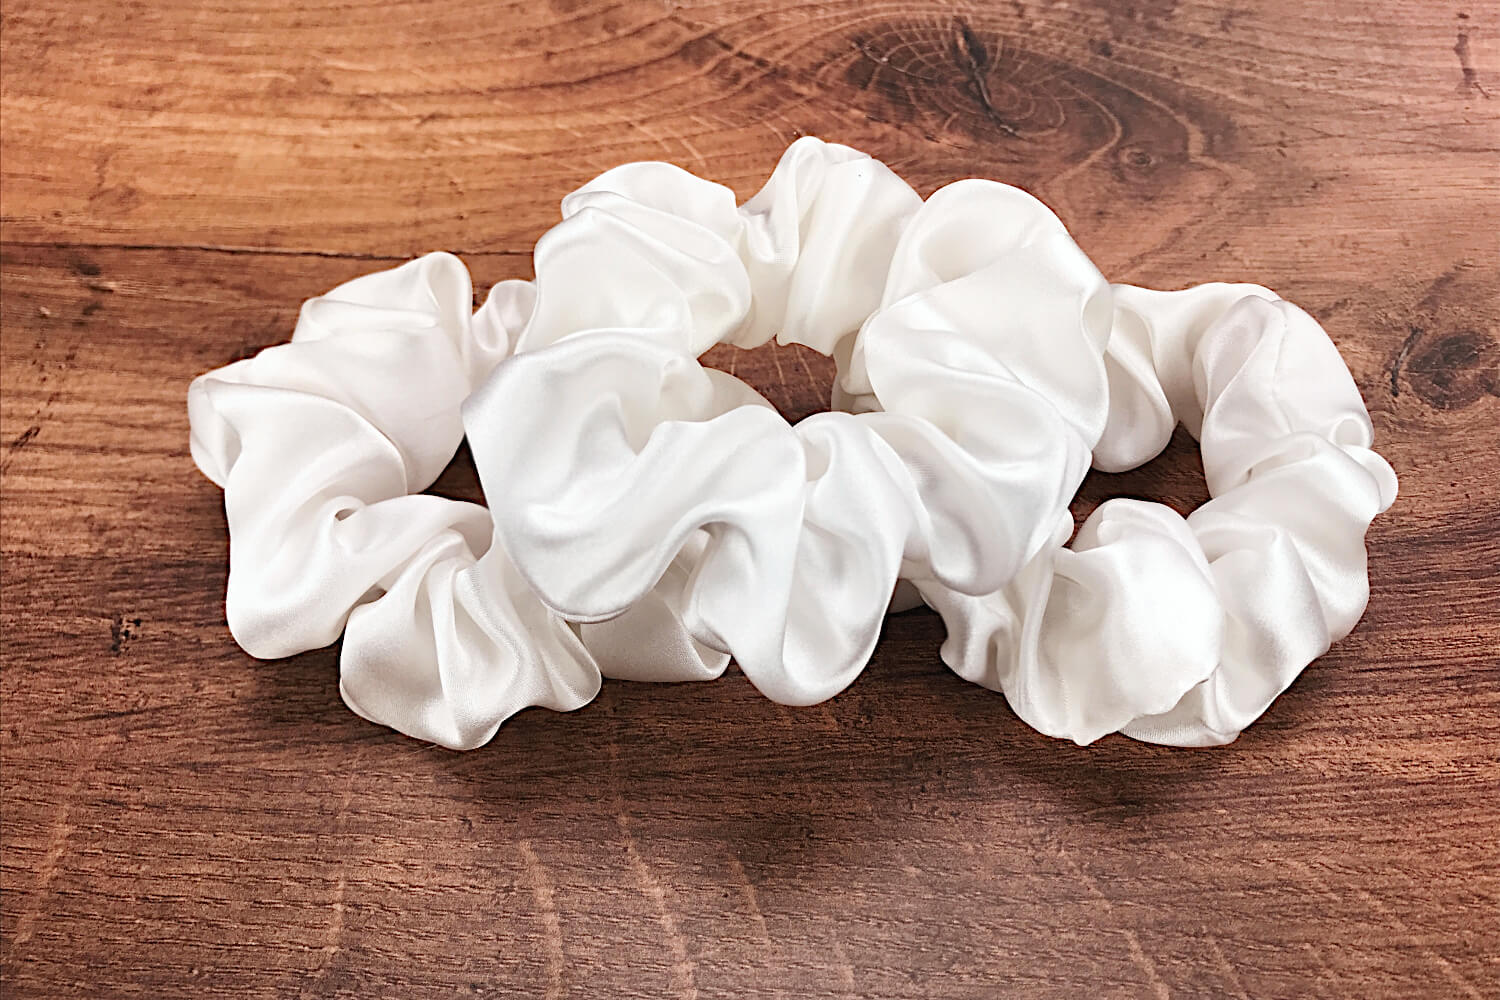 Large white silk hair ties by Celestial Silk laying in a pile on a wood vanity